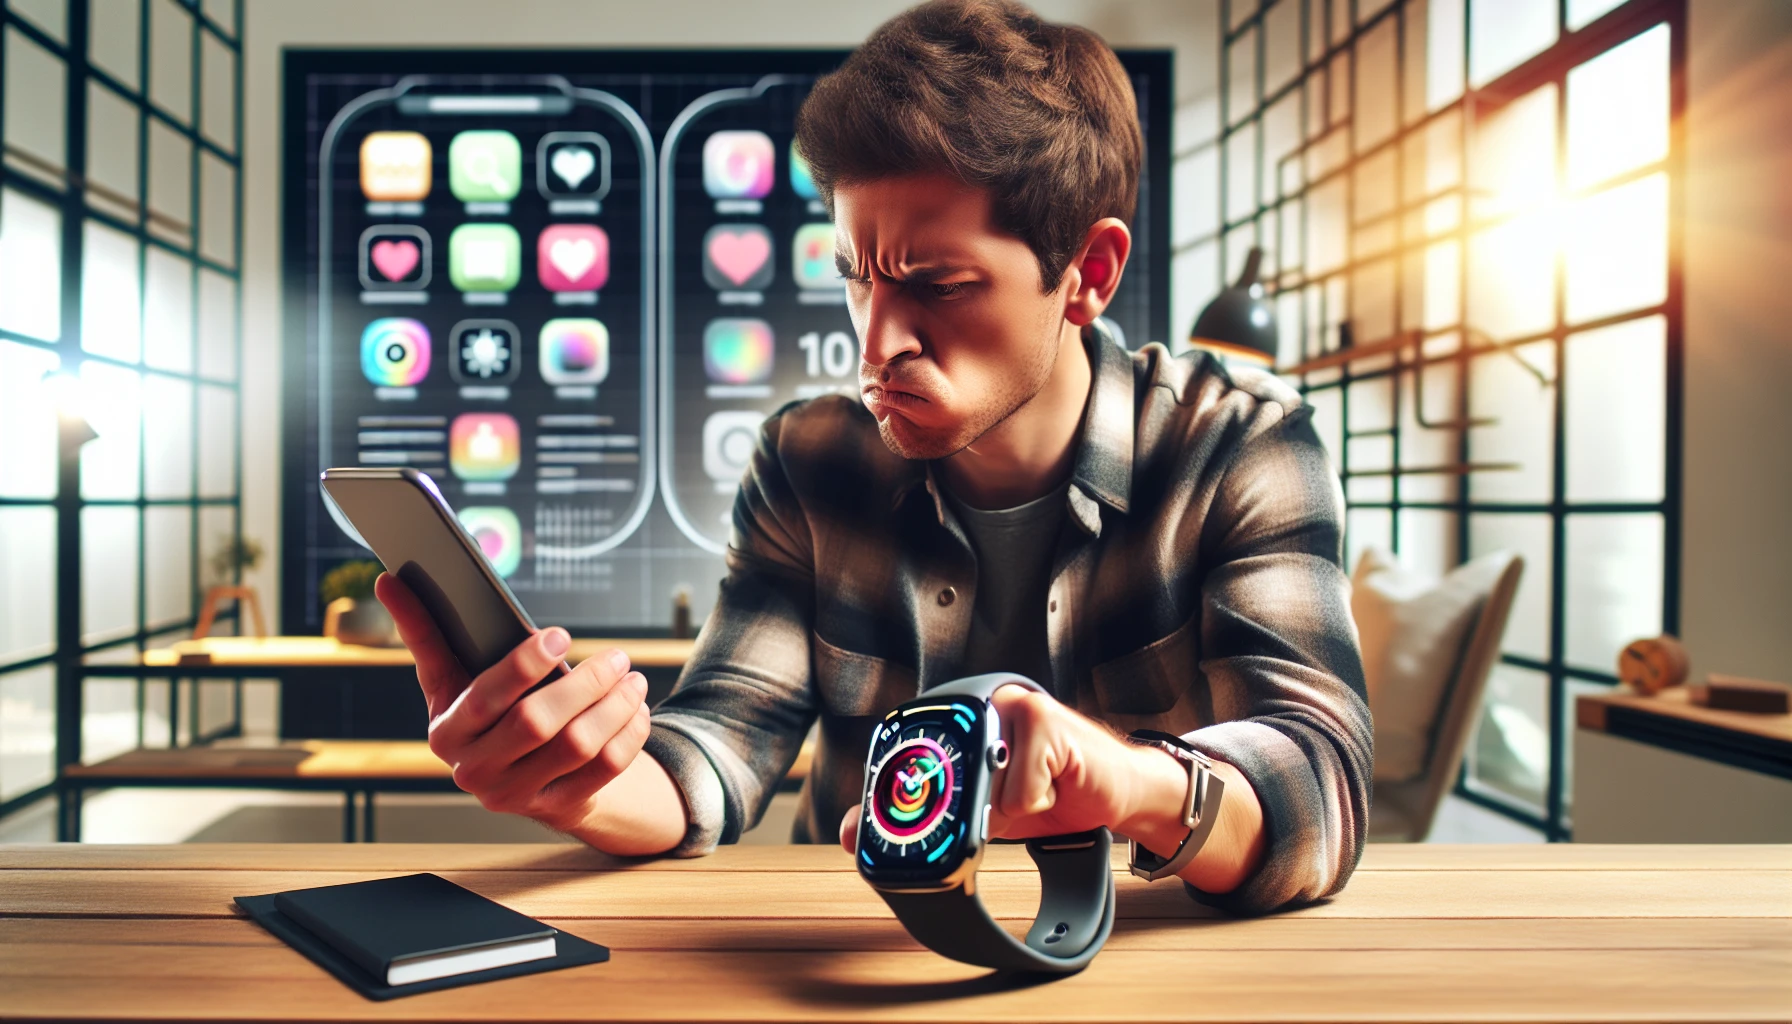 Troubleshooting unpairing issues on an Apple Watch